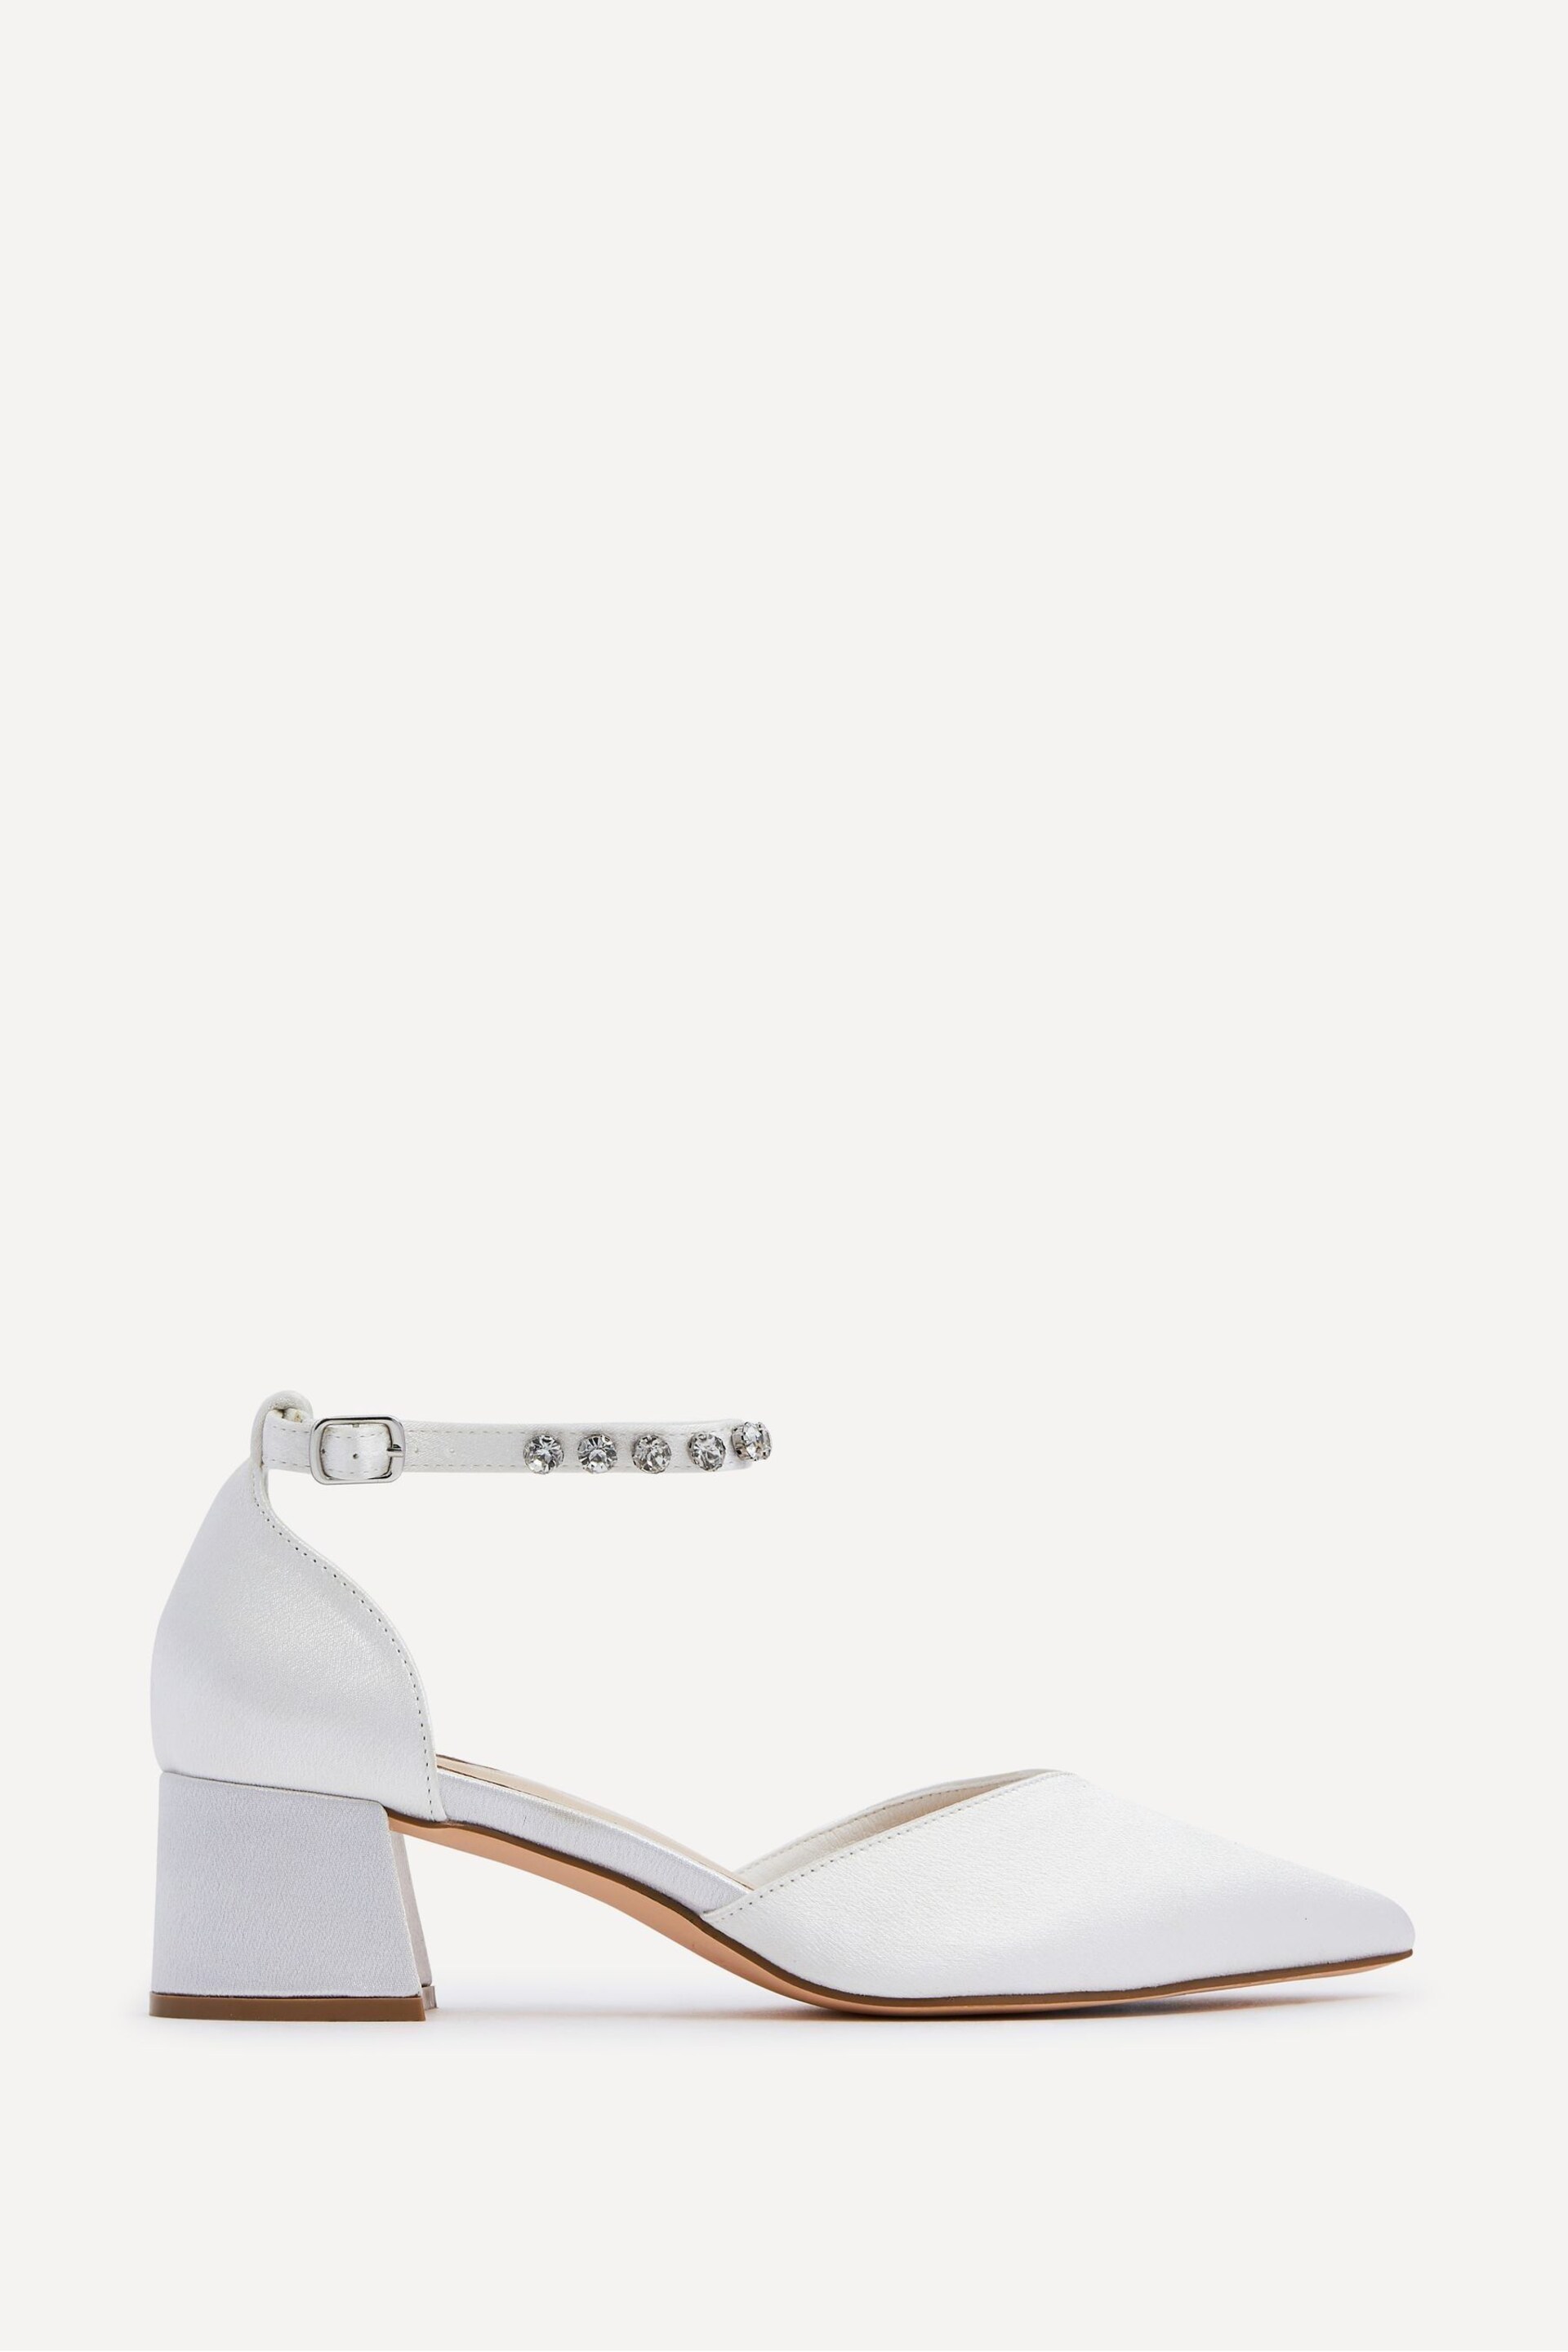 Linzi Natural Jordanna Ivory Satin Low Block Court Heels With Embellished Ankle Strap - Image 2 of 5